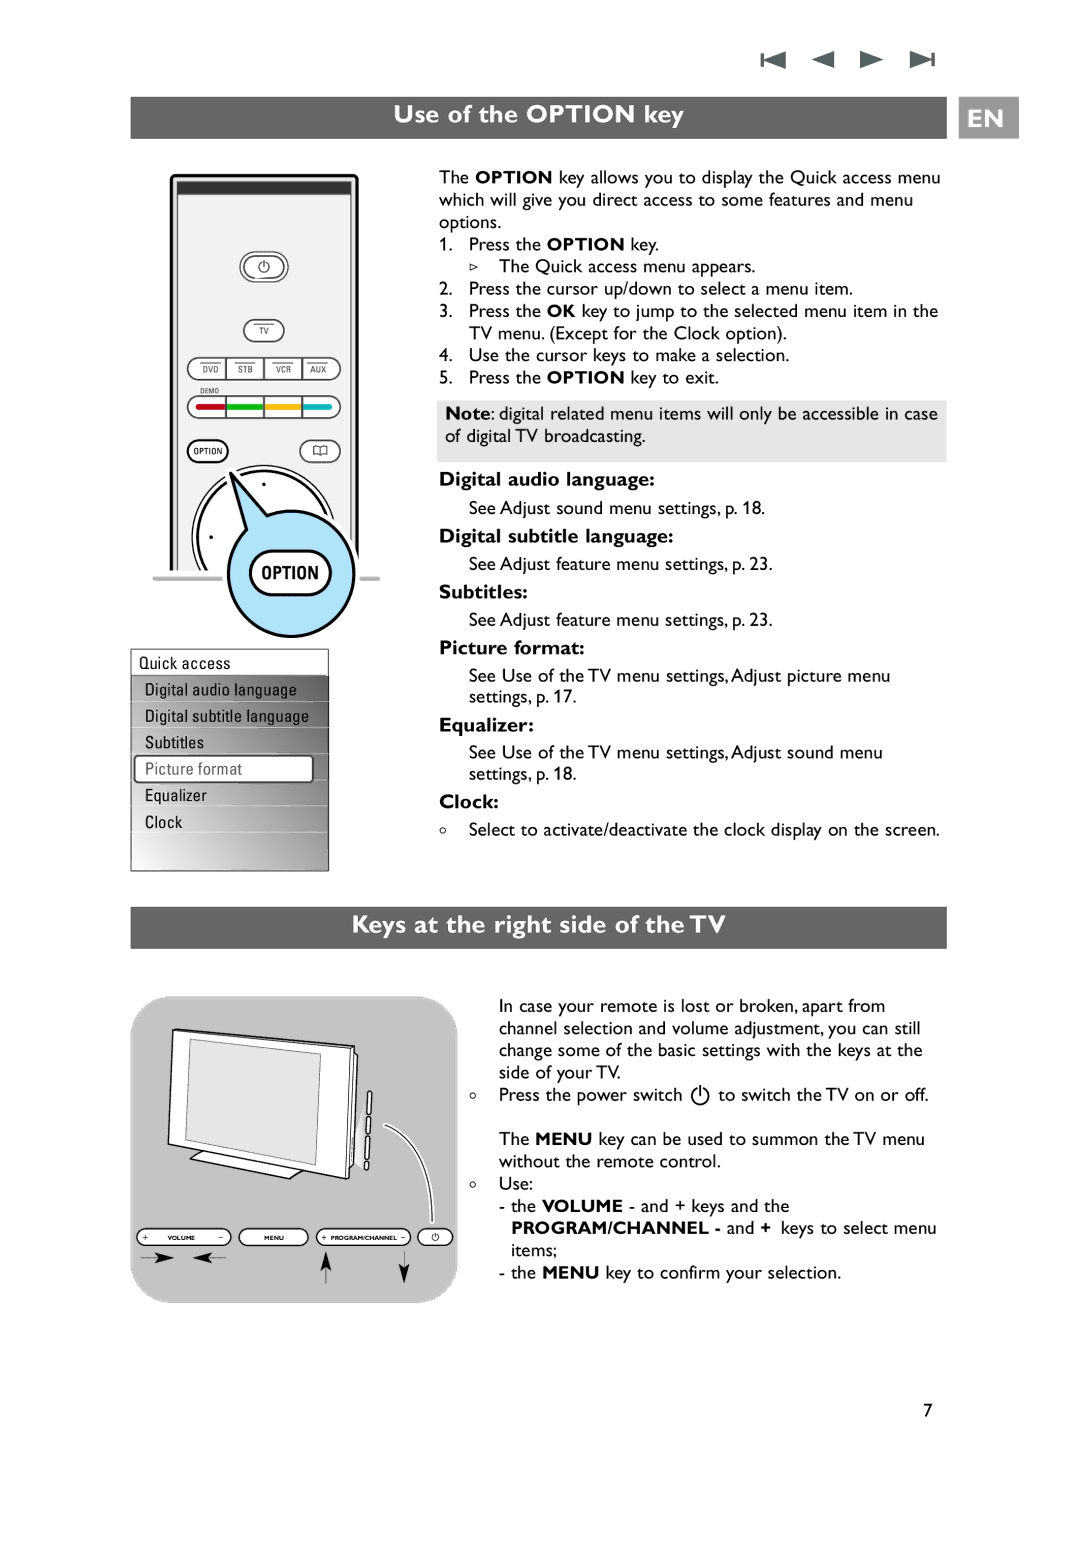 Philips 42PF9631D/10, 42PF9641D/10, 37PF9631D/10 user manual Use of the Option key, Keys at the right side of the TV 